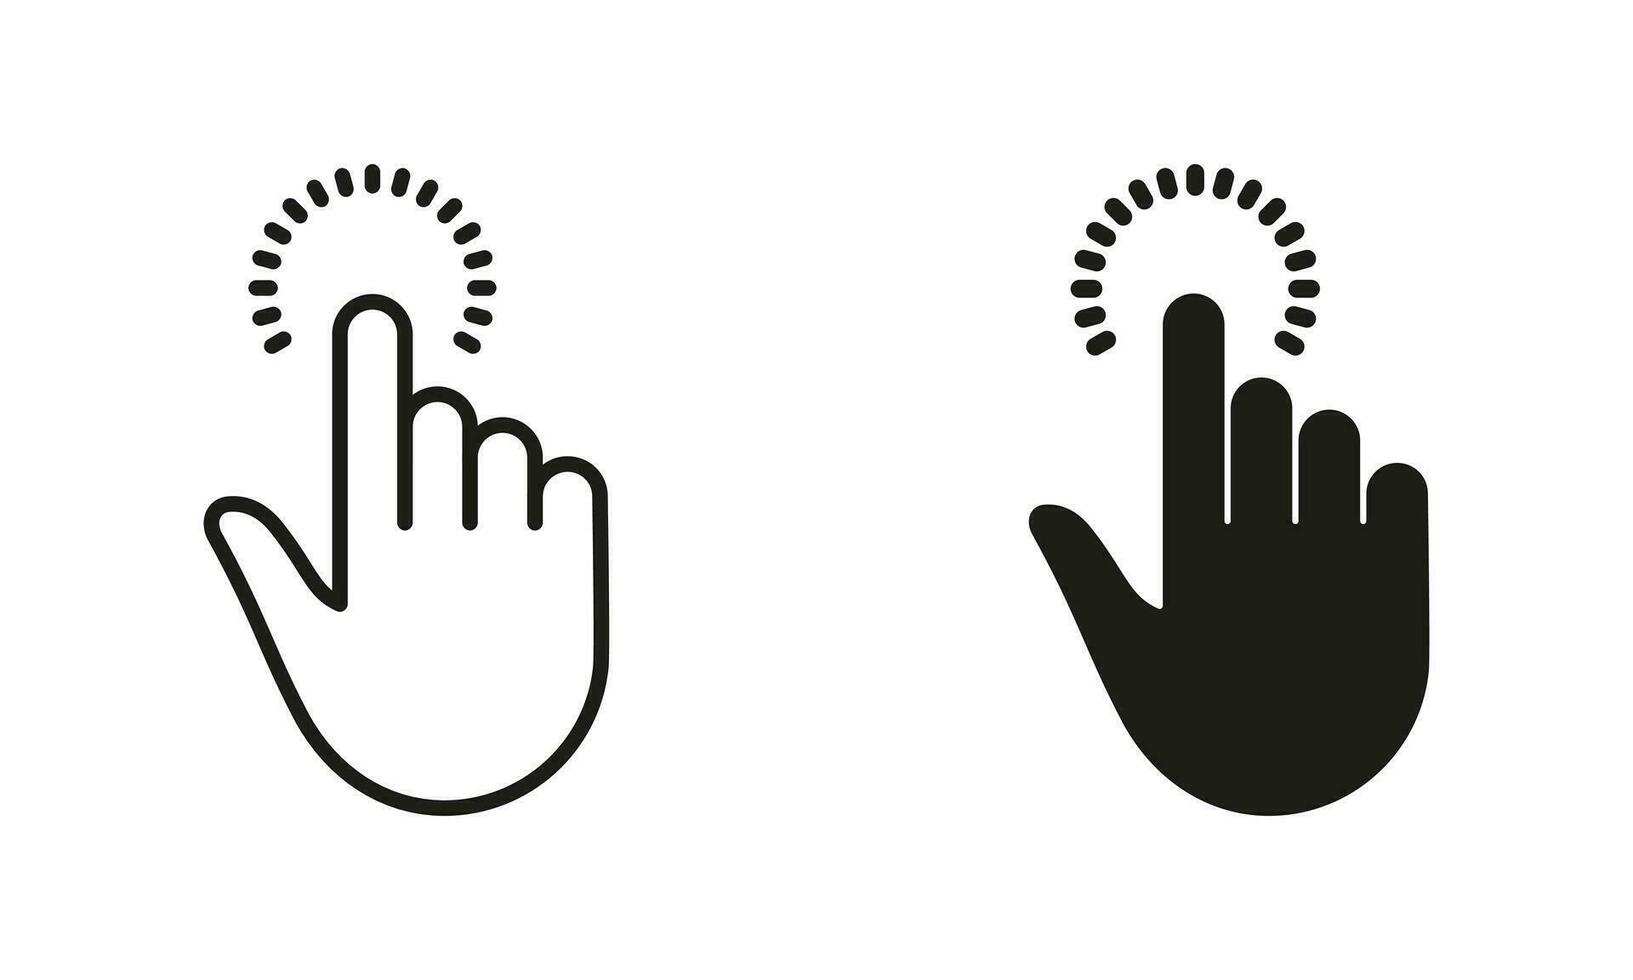 Cursor Hand of Computer Mouse Line and Silhouette Black Icon Set. Pointer Finger Pictogram. Tap, Touch, Point, Click, Press, Swipe Gesture Sign Collection. Isolated Vector Illustration.